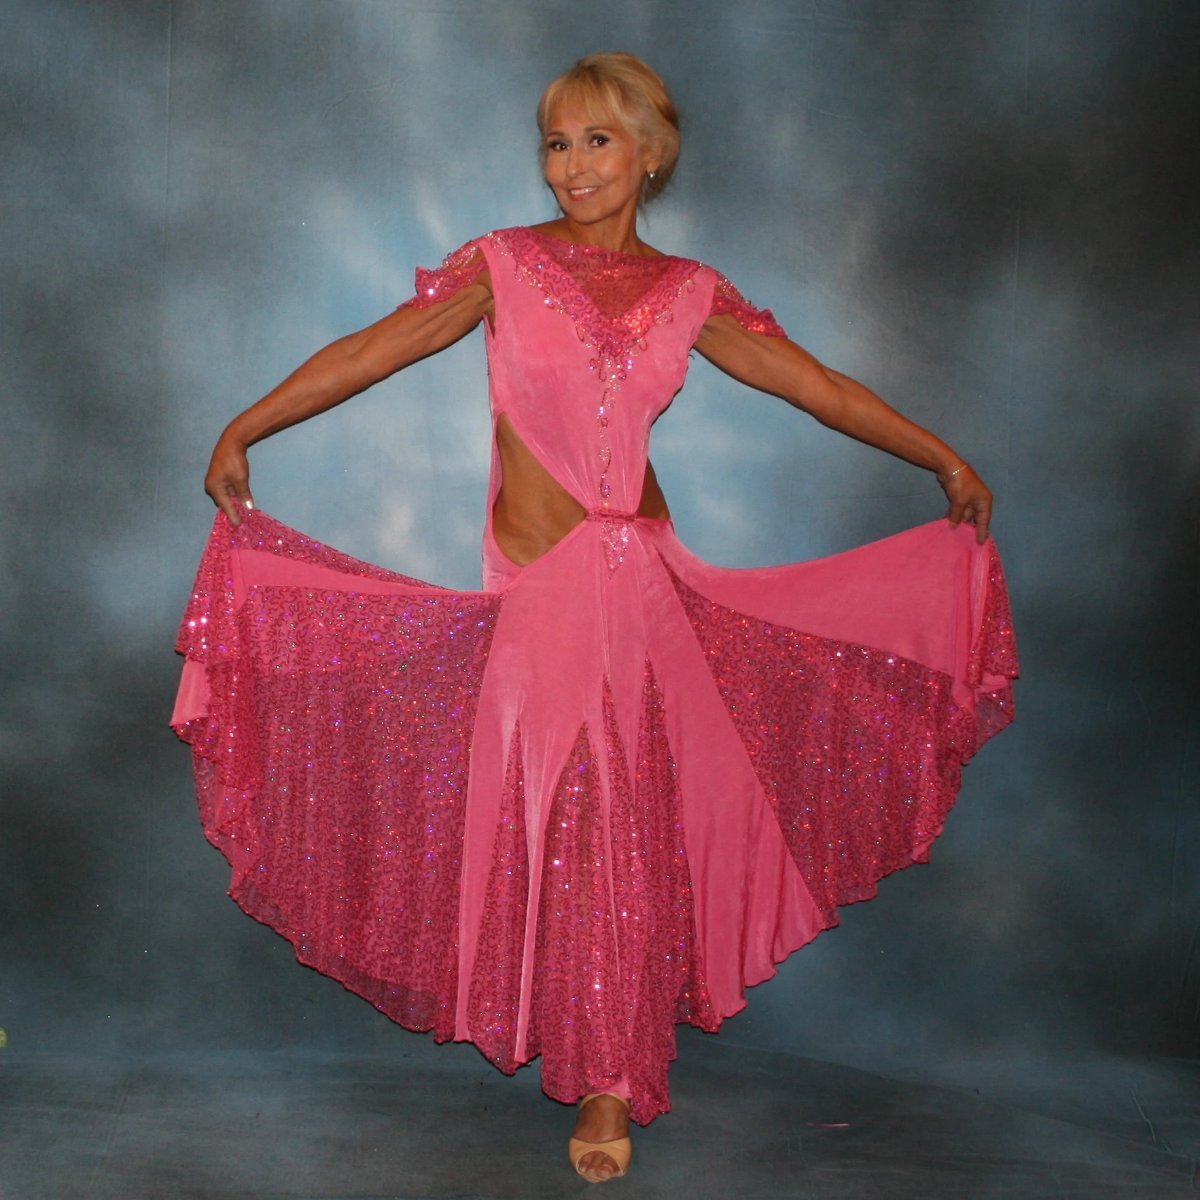 Crystal's Creations Pink ballroom dress was created of luxurious bubble gum pink solid slinky with yards & yards of delicate deep pink sequin insets & is embellished with CAB & rose Swarovski detailed rhinestone work